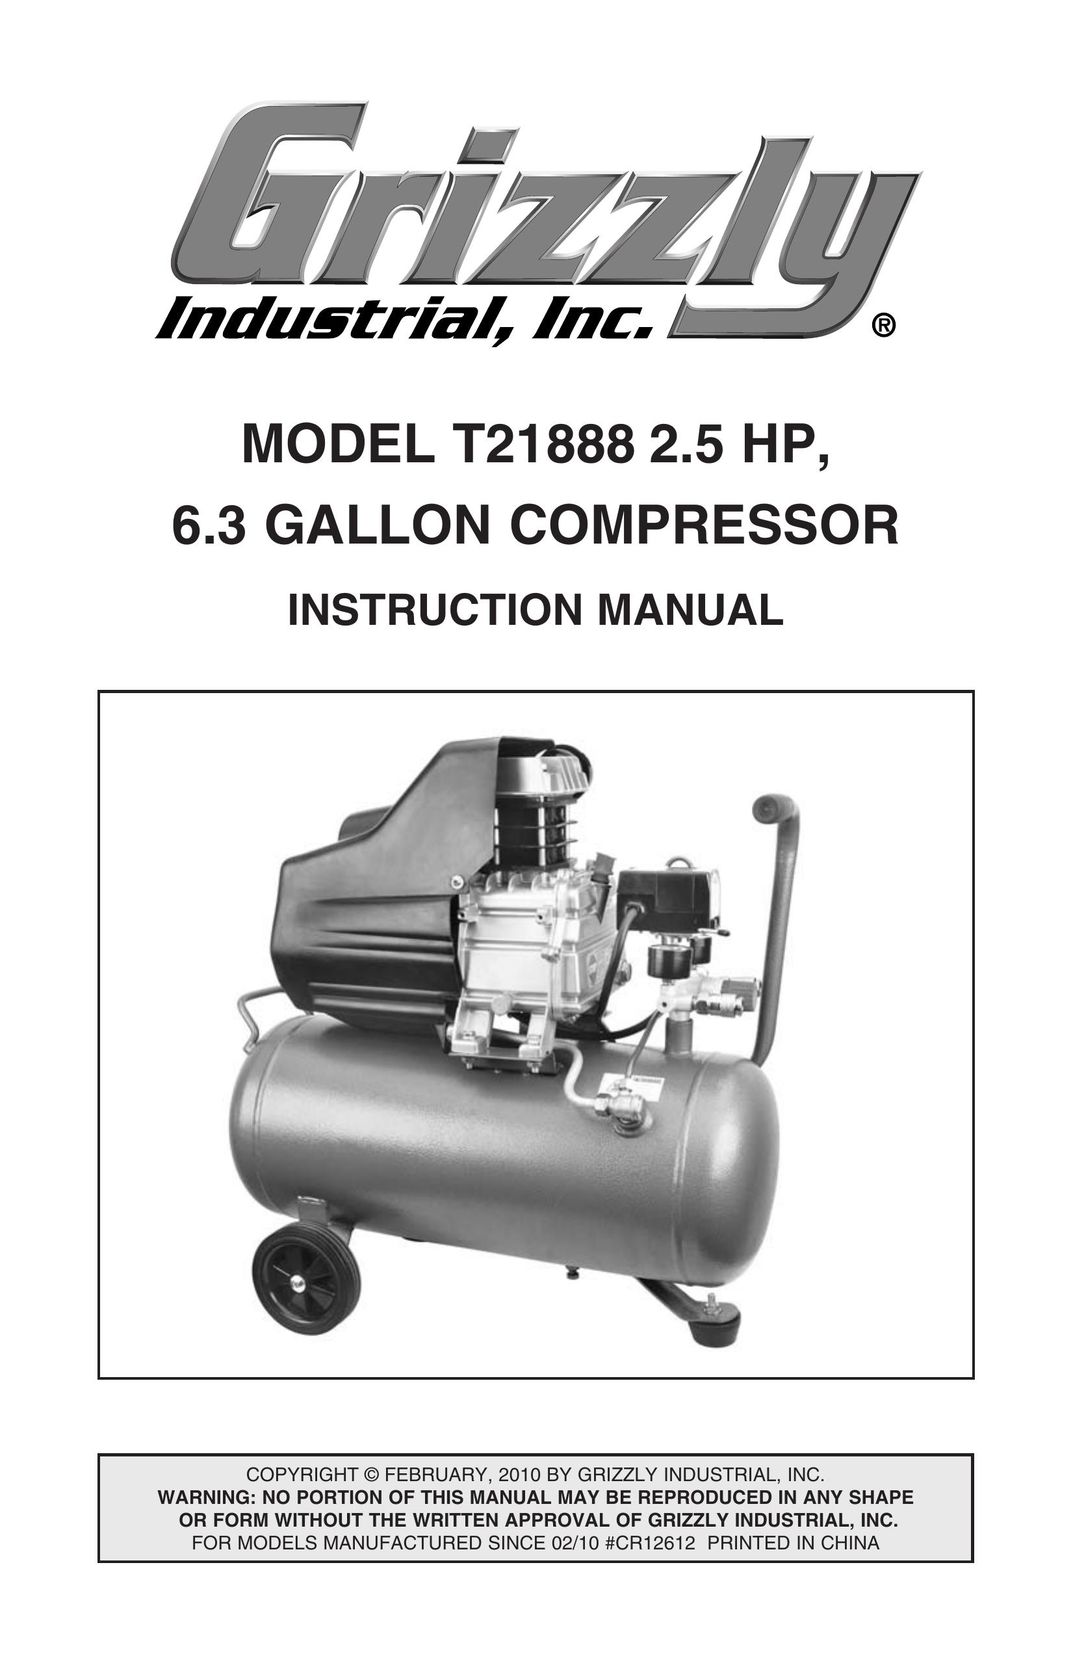 Grizzly T21888 Air Compressor User Manual